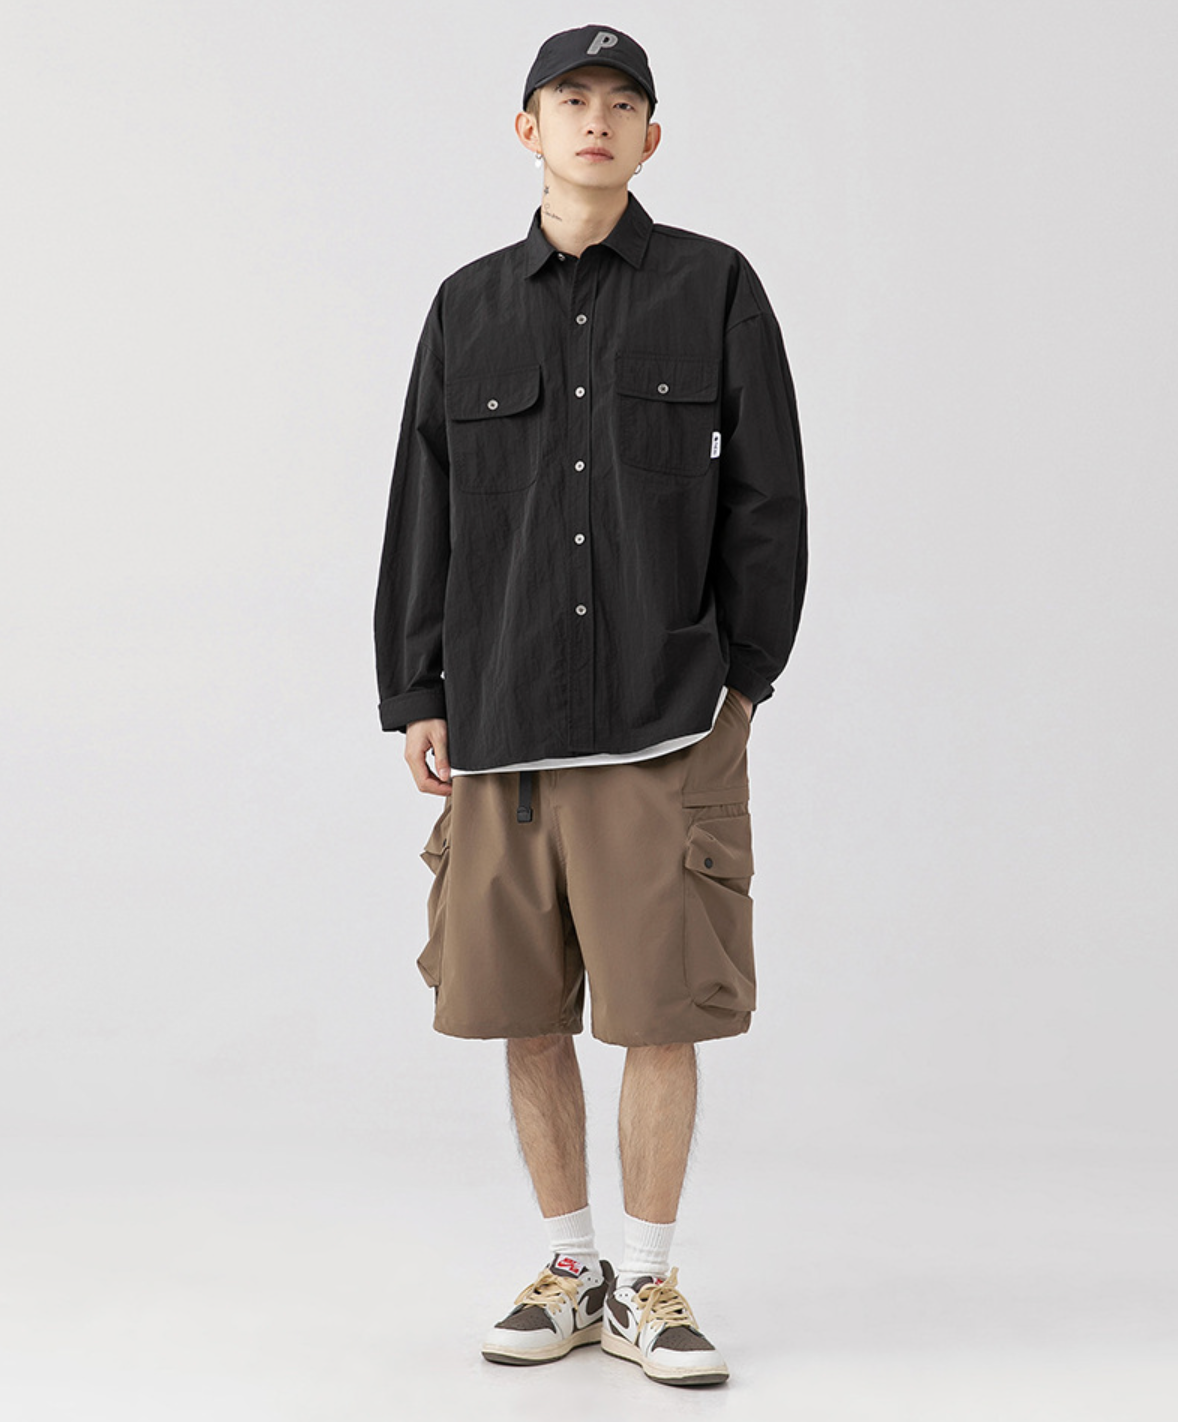 Retro Workwear Long Sleeve Shirt in Black – The Daily Lab